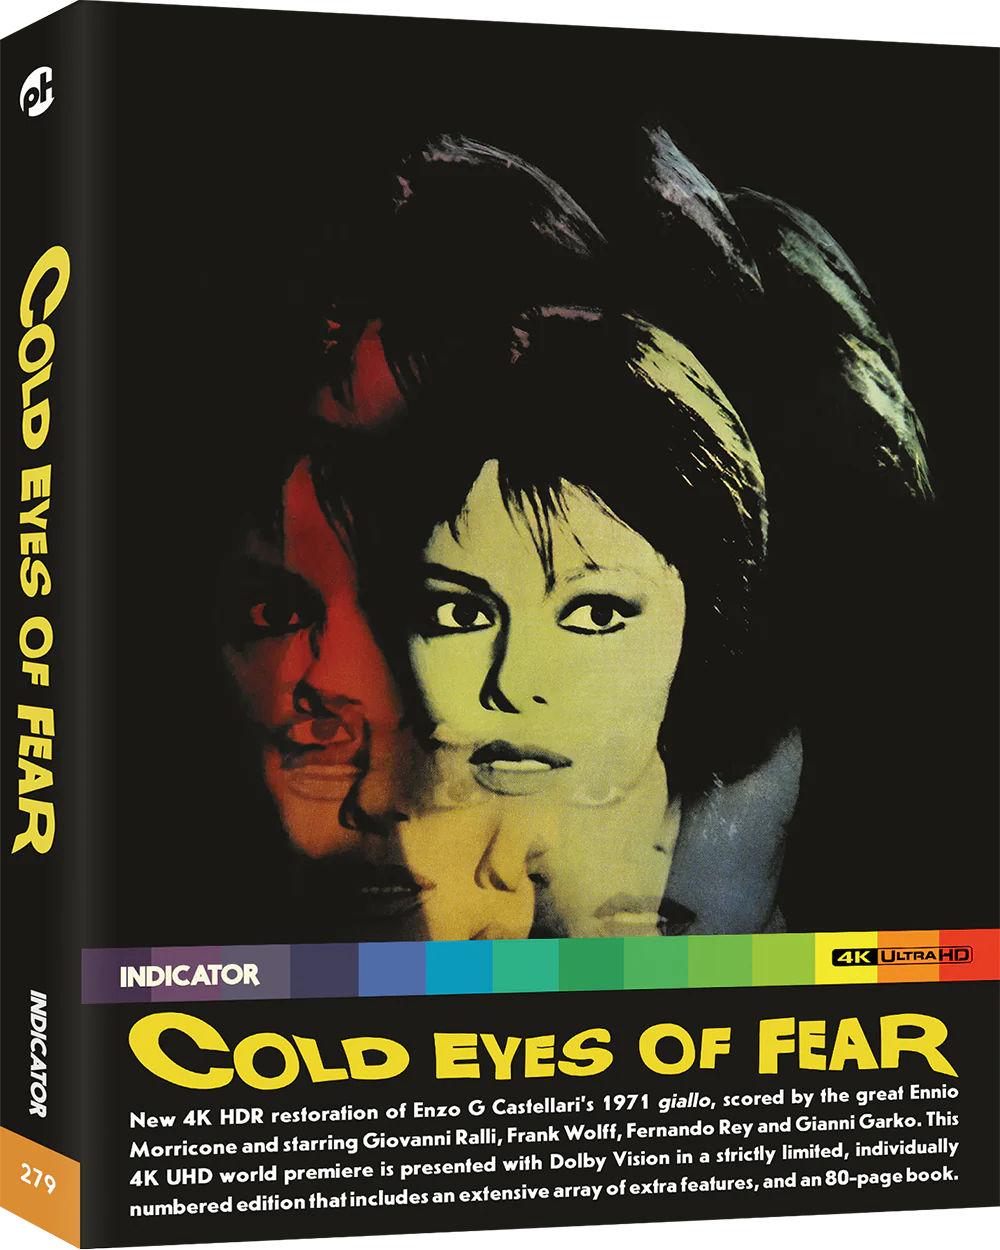 Cover of the 4K version of The Cold Eyes of Fear